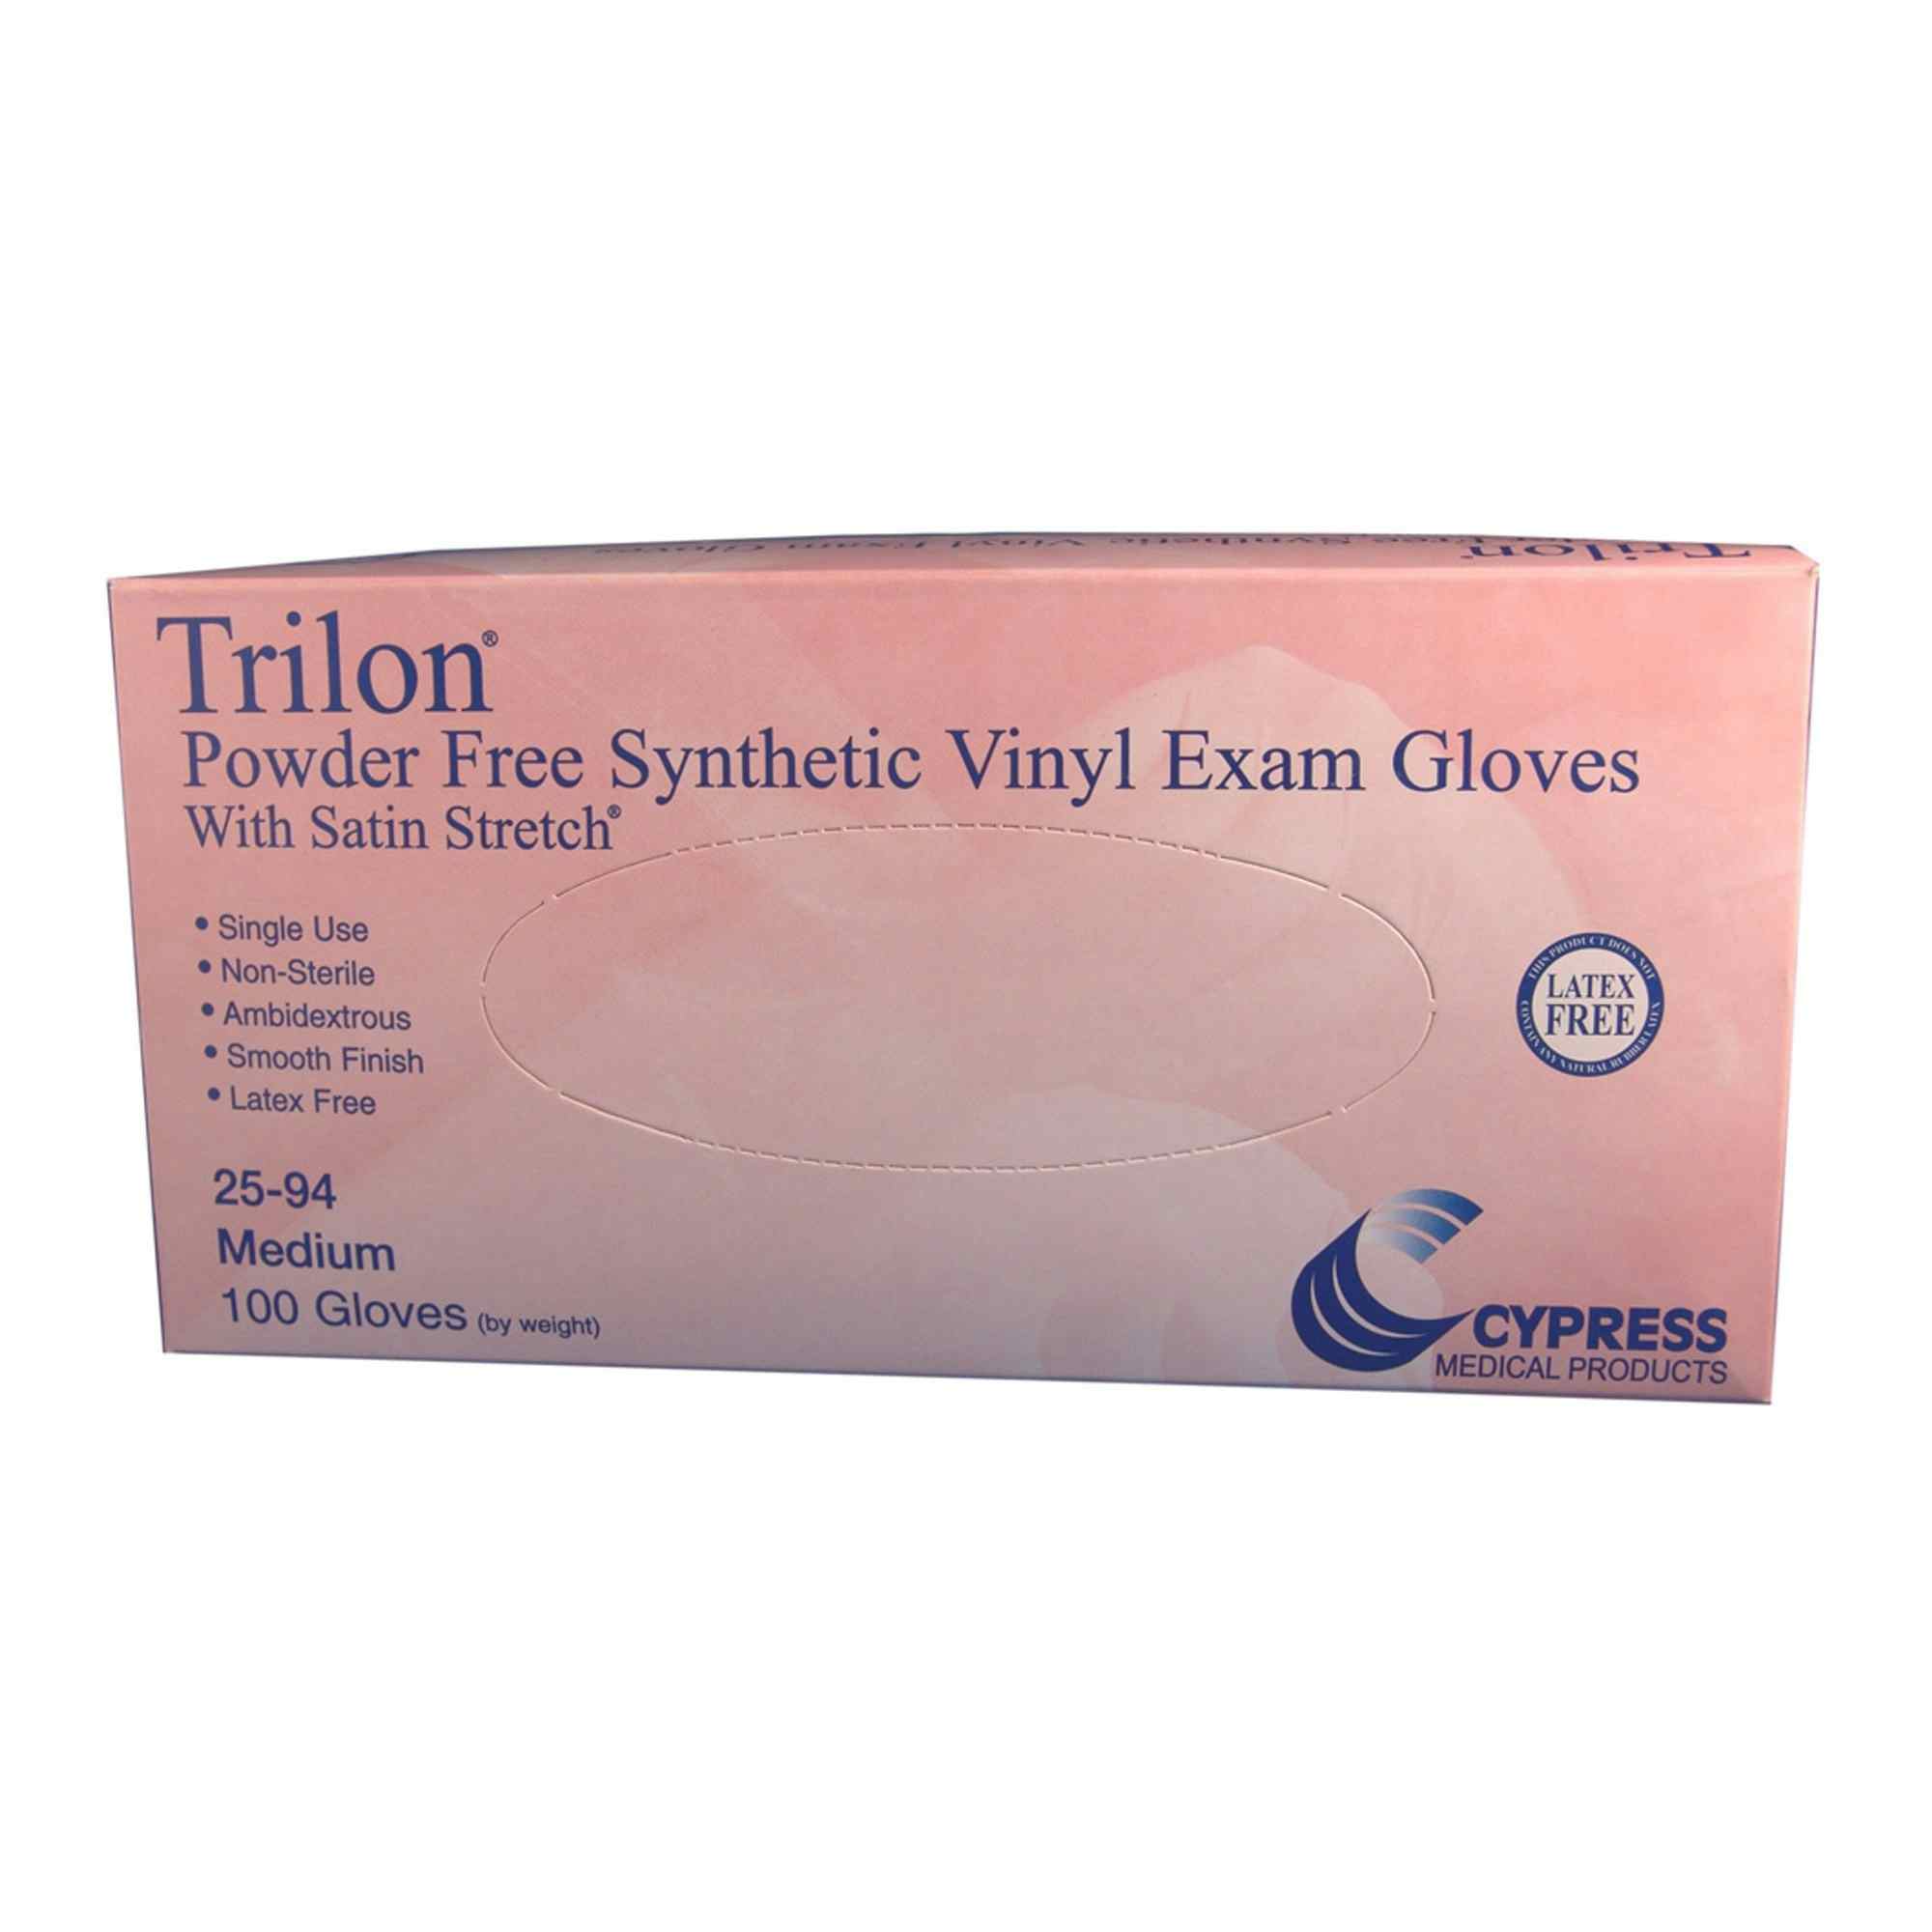 Trilon Powder Free Synthetic Vinyl Exam Glove, Clear, 25-96, Large - Case of 1000